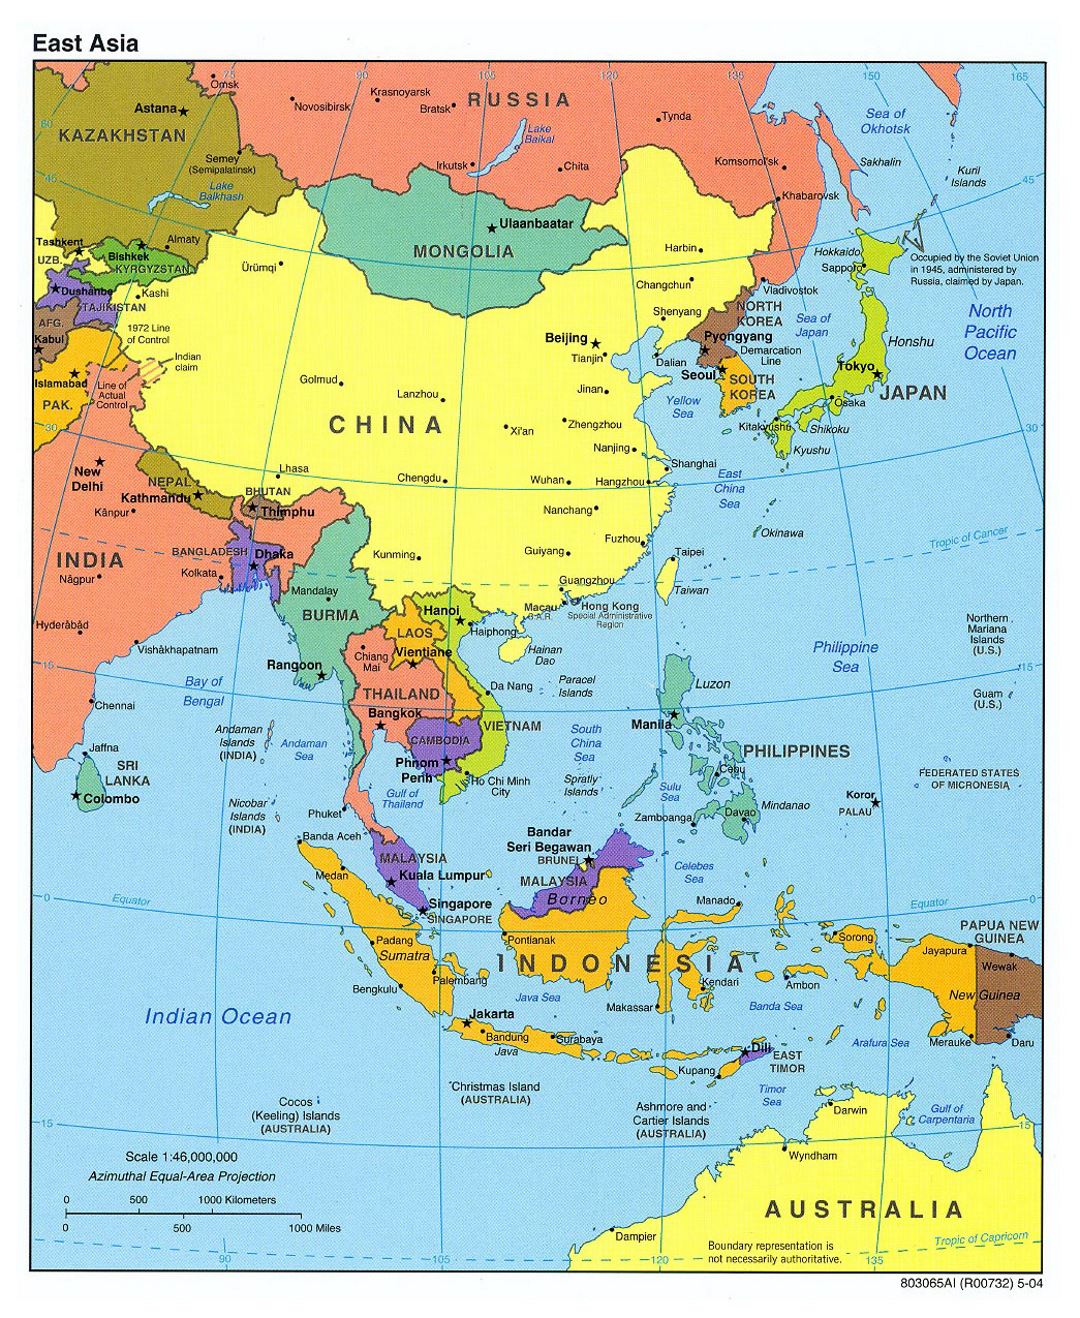 Detailed political map of East Asia - 2004